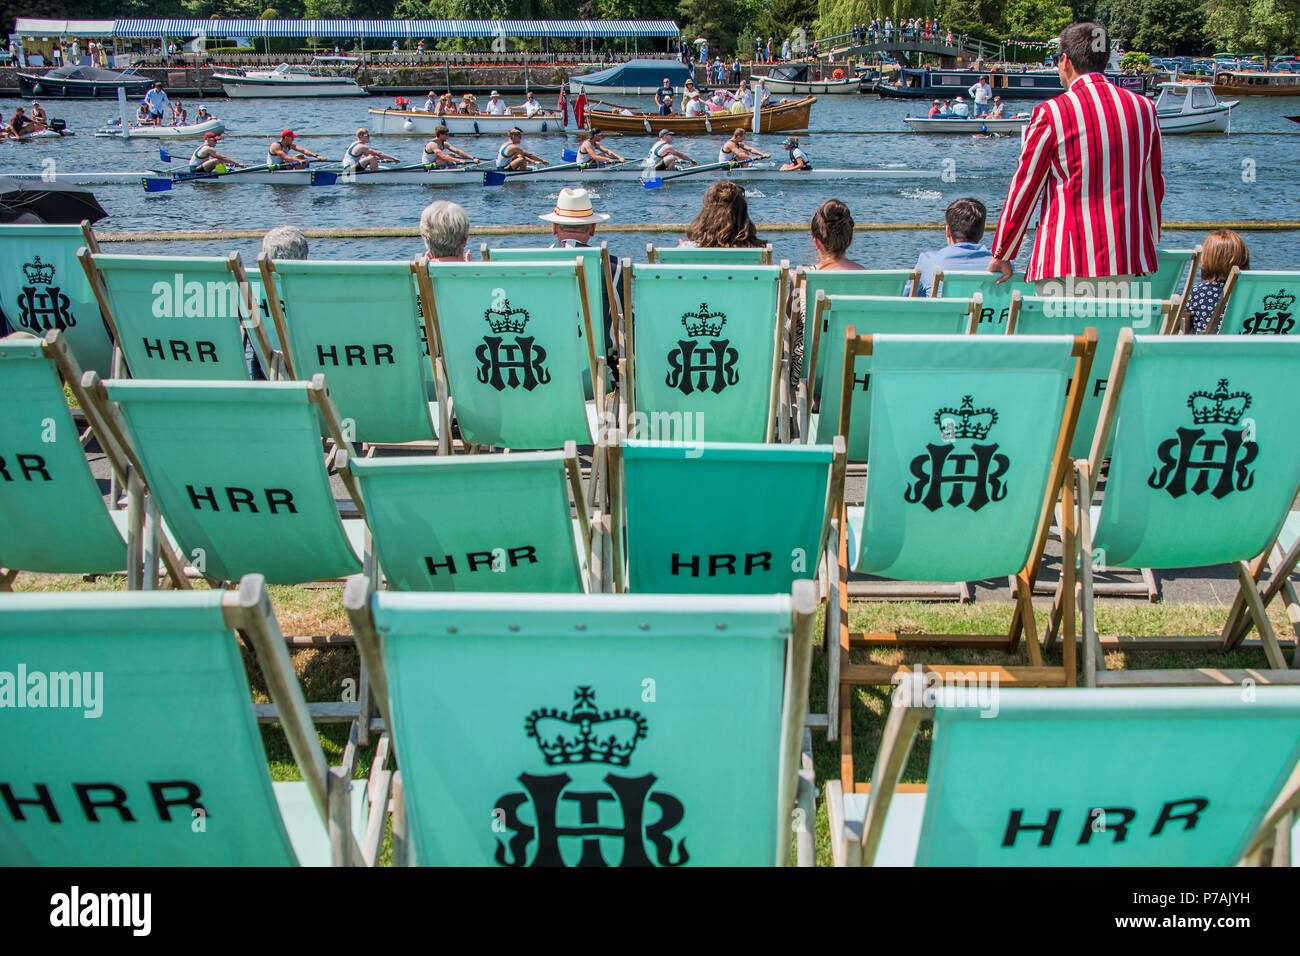 Henley on Thames, UK. 5th July, 2018. Another scorching day brings out the blazers and summer dresses in the Stewards Enclosure - Henley Royal regatta, Henley on Thames, UK 05 Jul 2018. Credit: Guy Bell/Alamy Live News Stock Photo